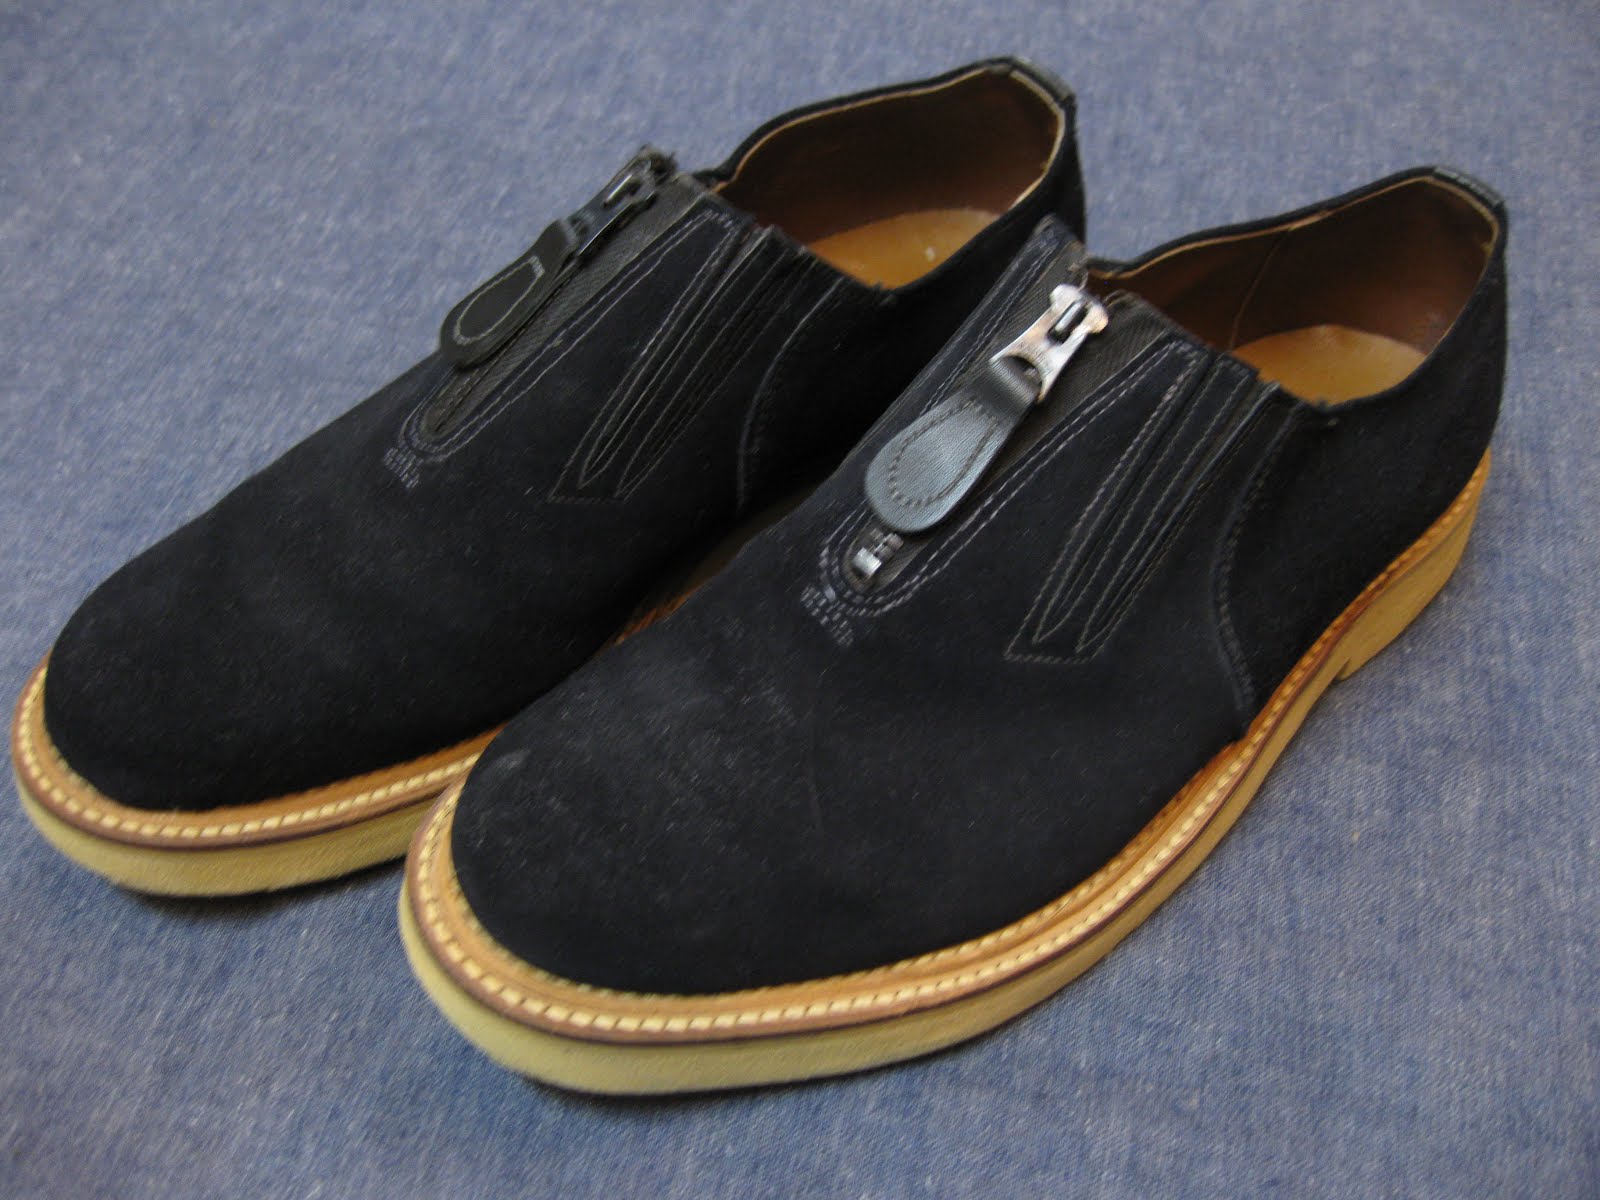 50's　BLUE　SUEDE　SHOES　　　　　　　　　　　　　　　ダブル コバ　　　　　　　　　　　　　　　ENDICOTT　JOHNSON　CO.　　　　　　　　　　　　　　　　SOLD